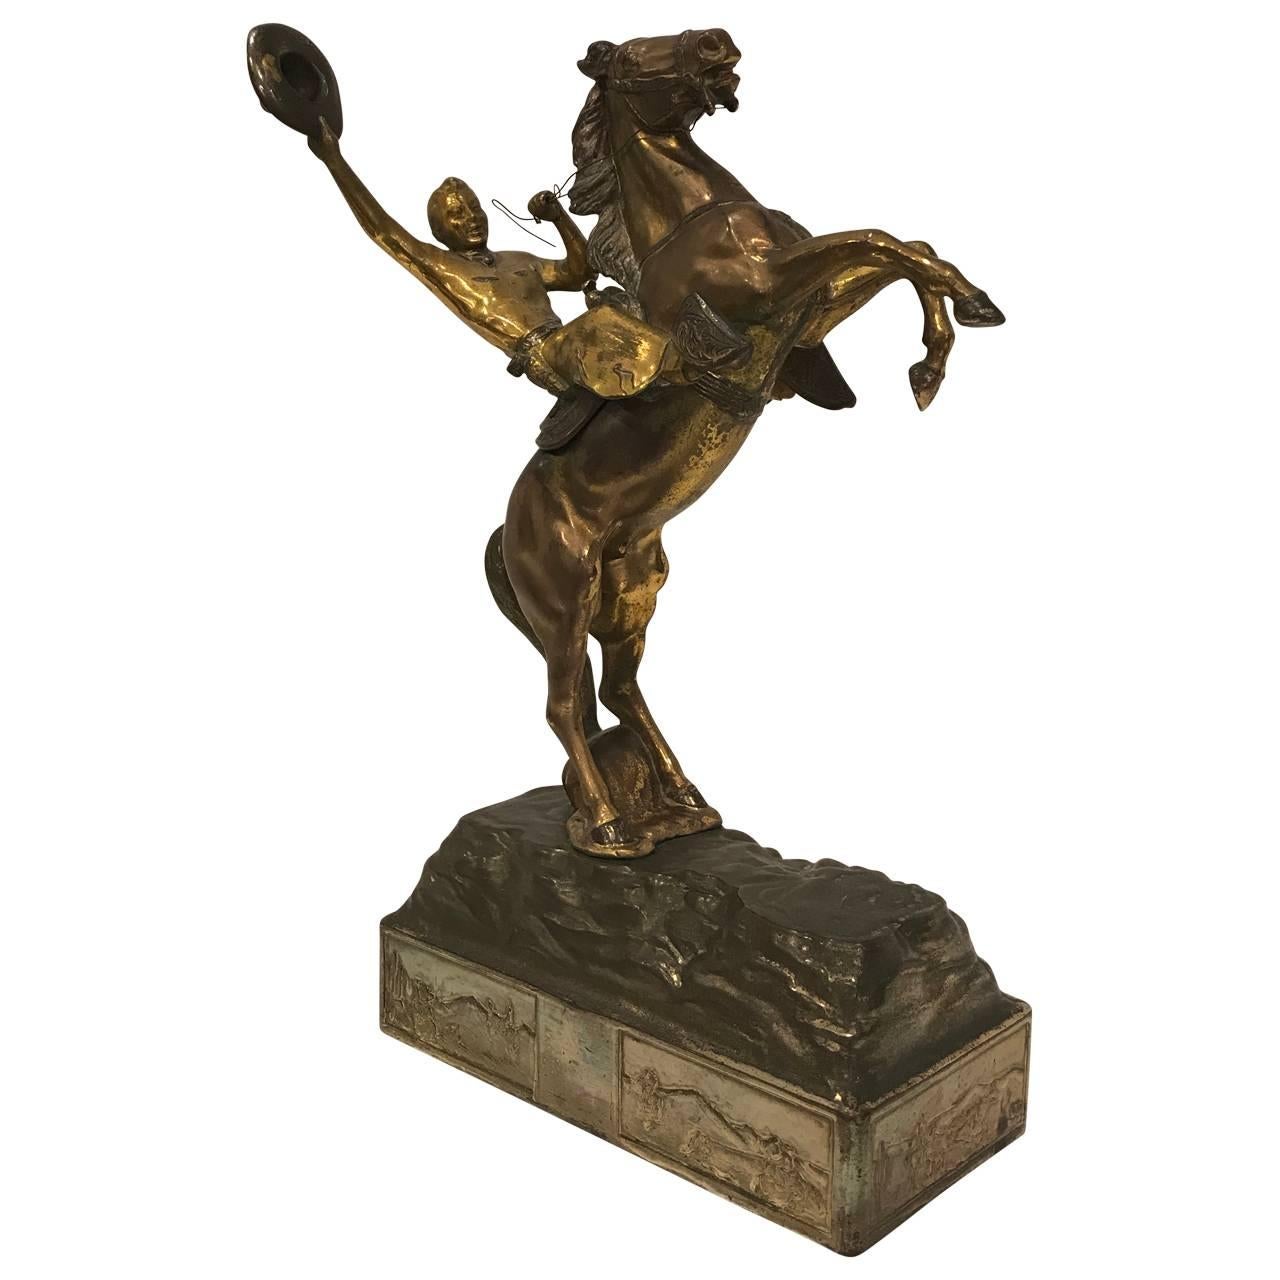 Gilt brass sculpture on stand, depicting a celebrating cowboy on a wild horse with great patina.